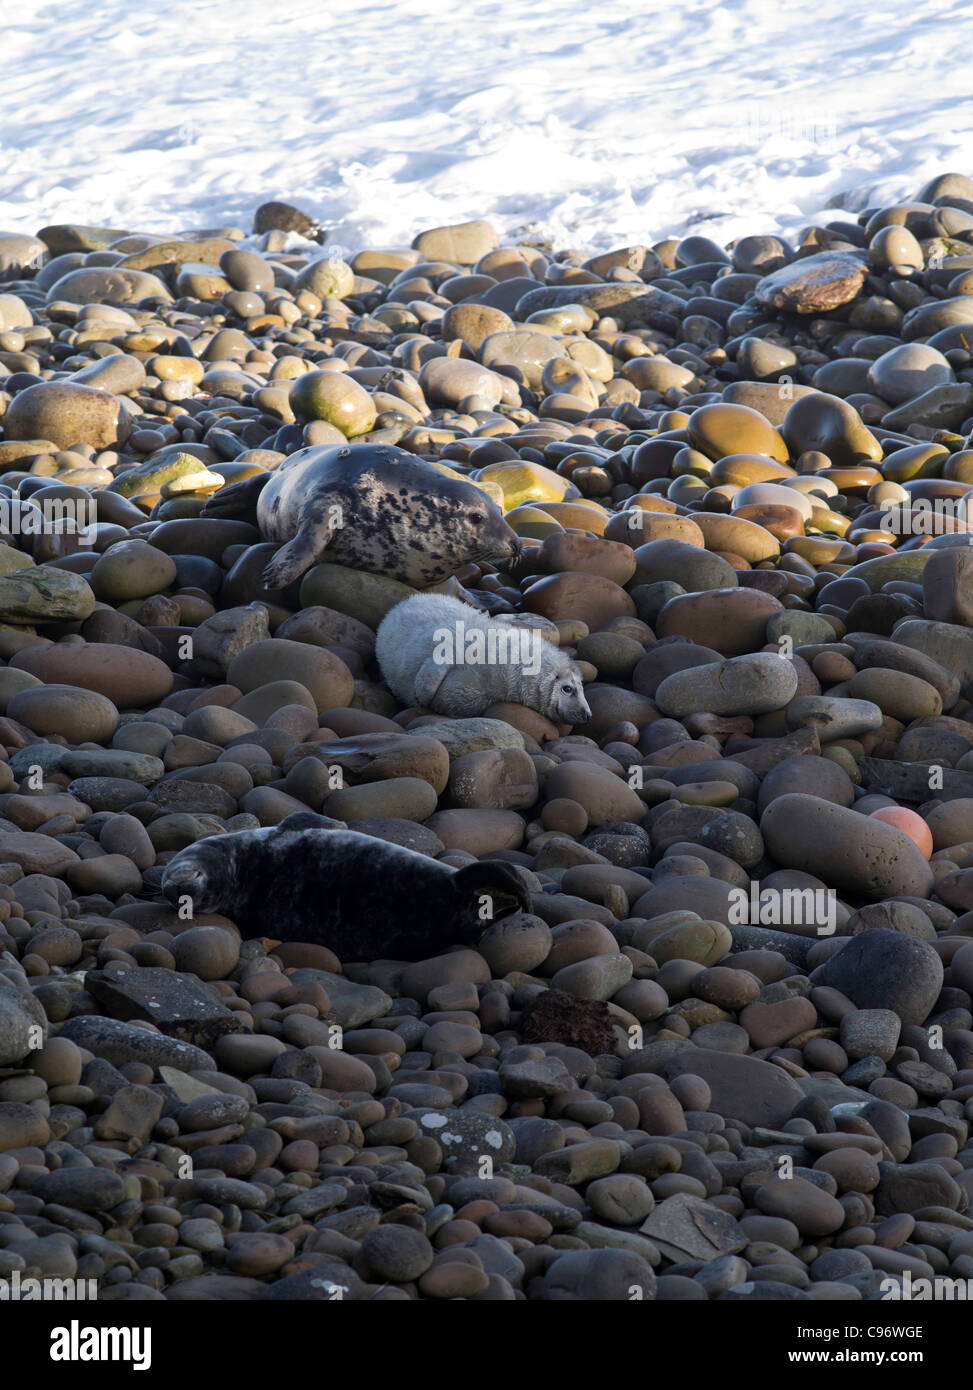 dh Halichoerus grypus Seals SEAL UK Newborn atlantic grey seal pup and mother seal rocky shore orkney rocks cub Stock Photo